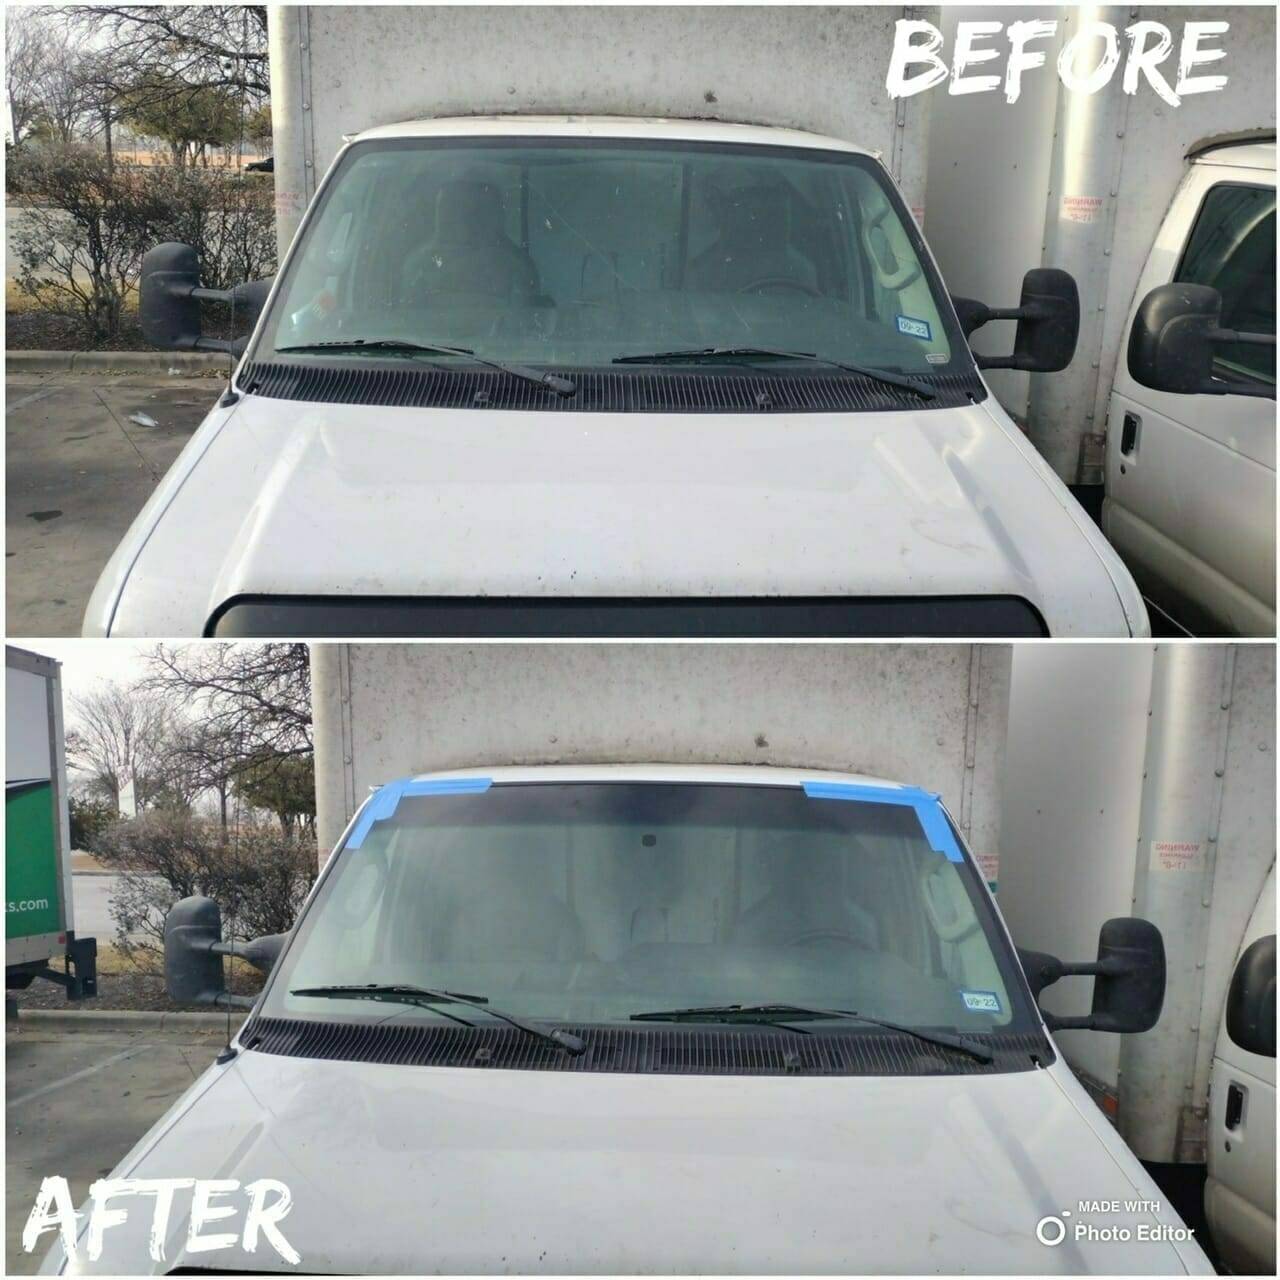 A split image showing a before-and-after comparison of a moving van's front windshield in LaVernia, Texas. The top half illustrates the damaged state of the windshield, while the bottom half reveals the restored windshield after a home auto glass appointment.